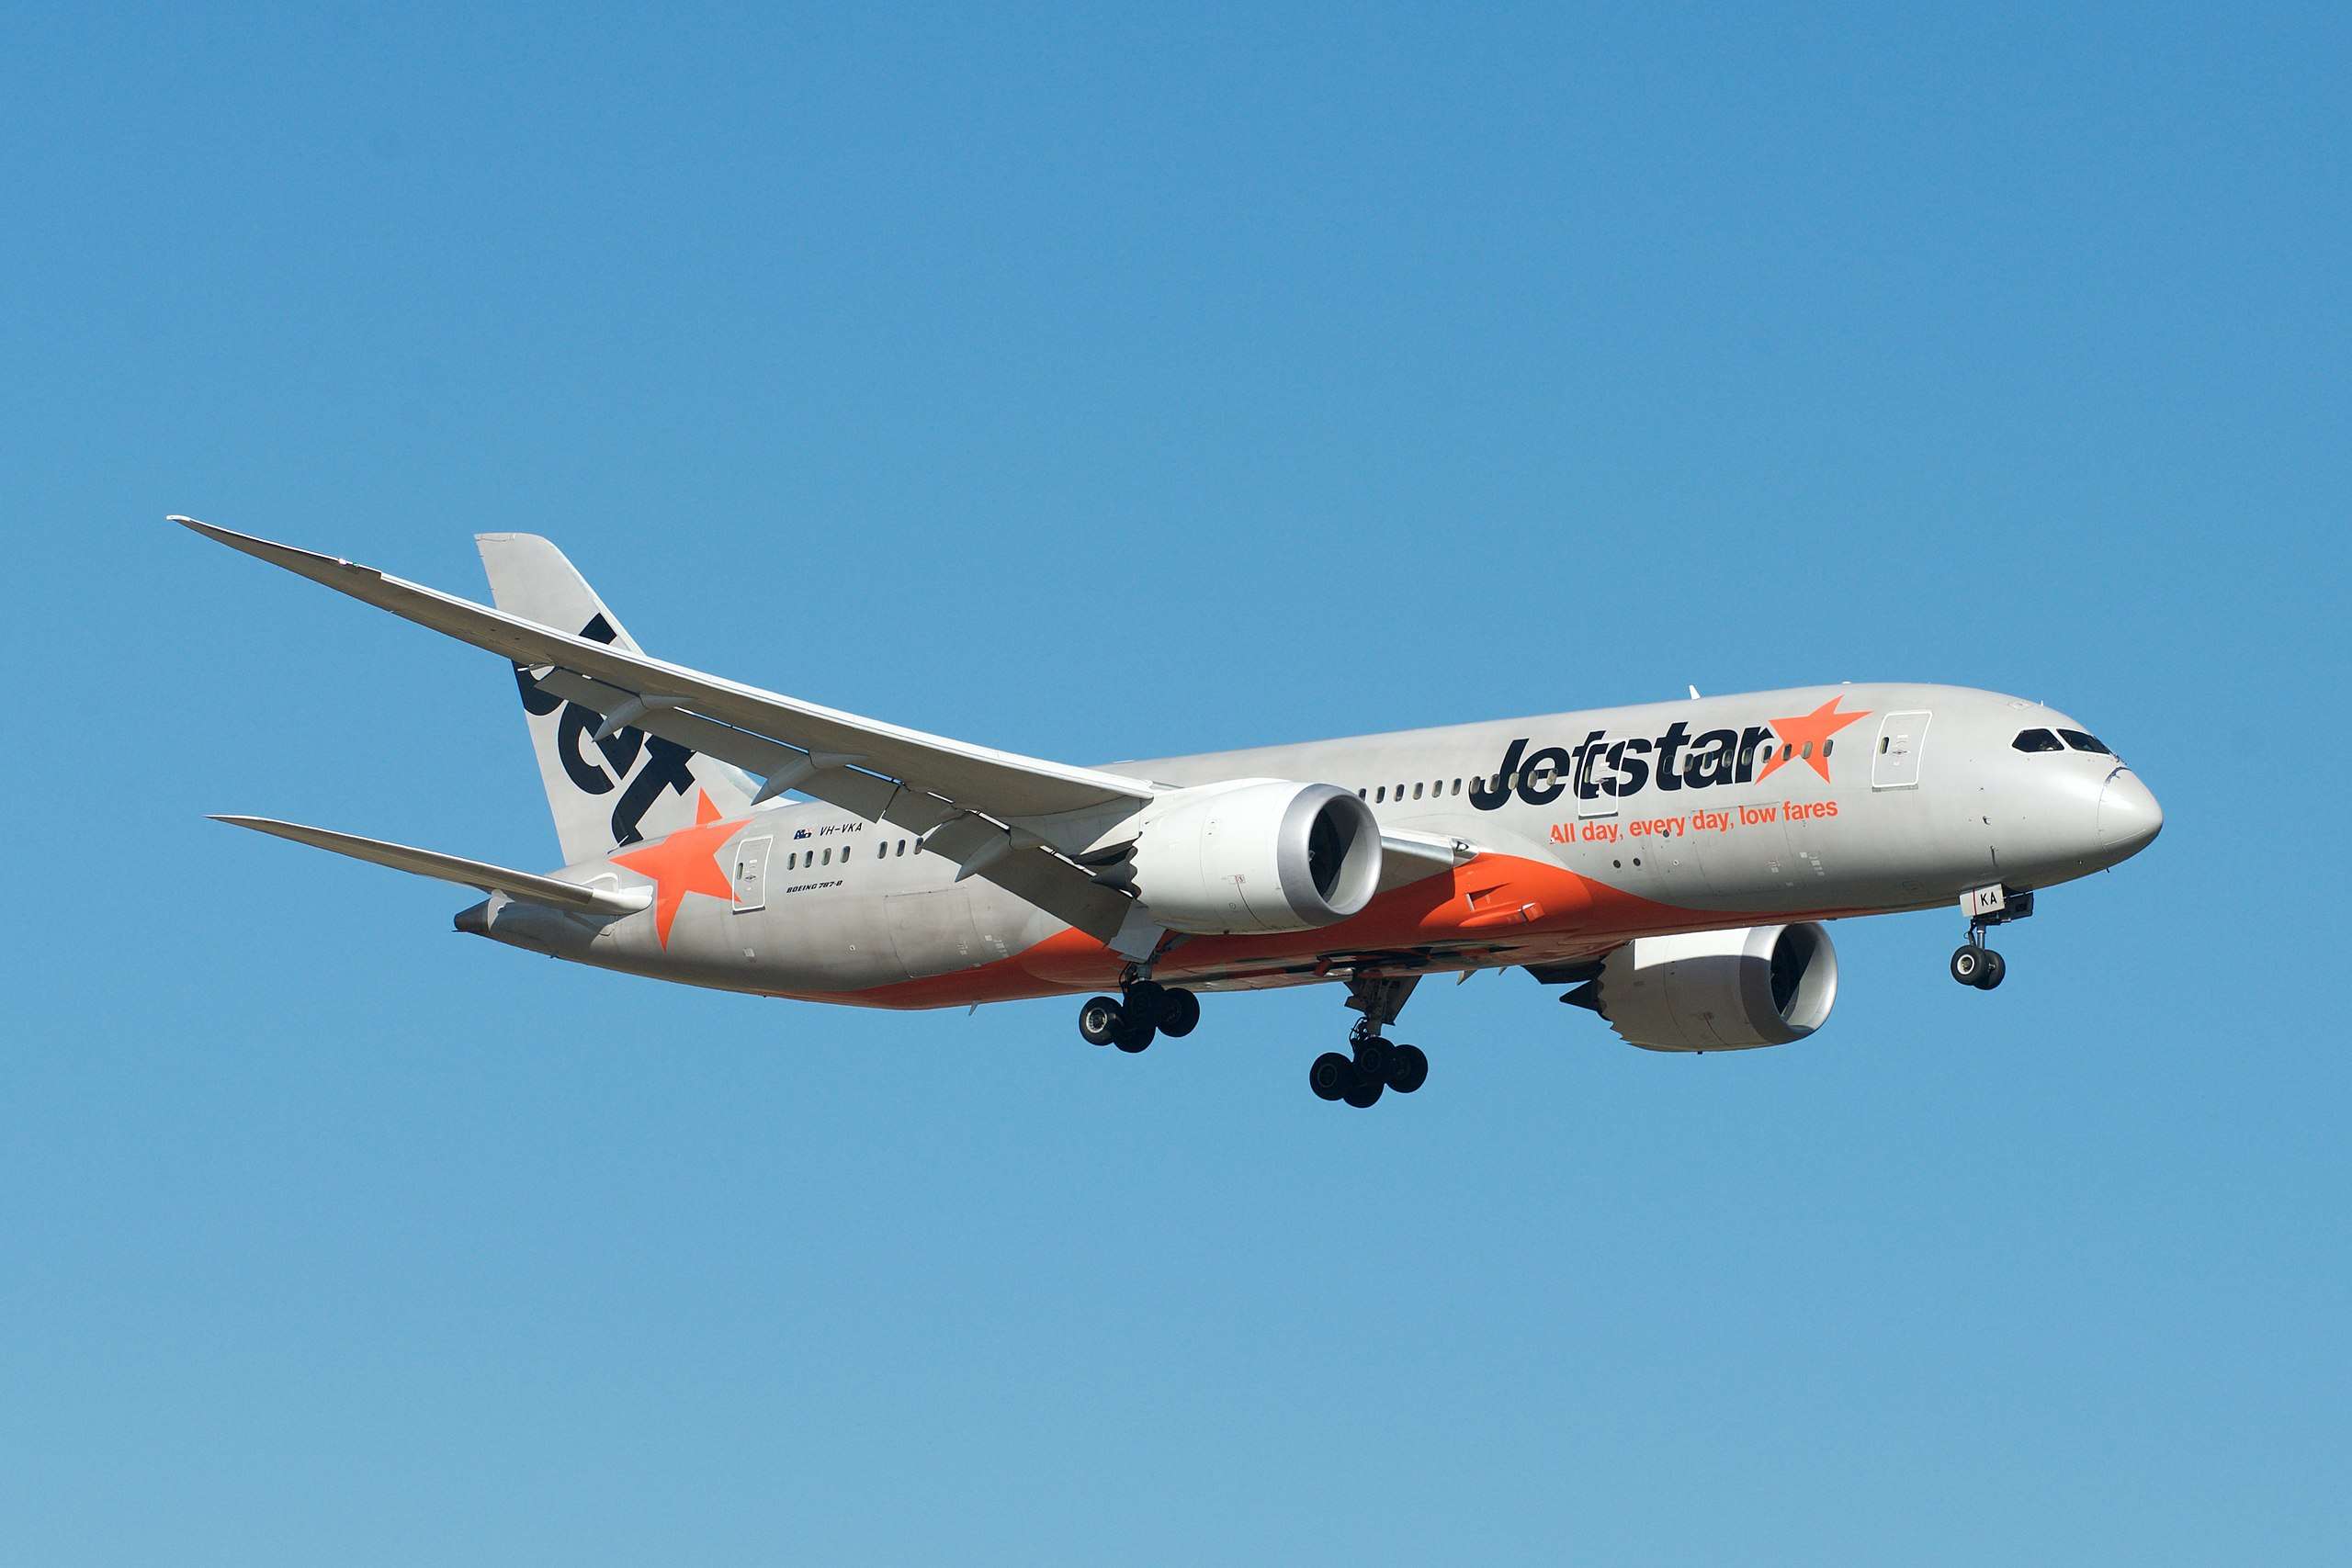 Earlier last week, a Jetstar Boeing 787 between Tokyo Narita and Cairns suffered a crack windscreen, causing a diversion to Guam. The jet has been stuck there for a week.